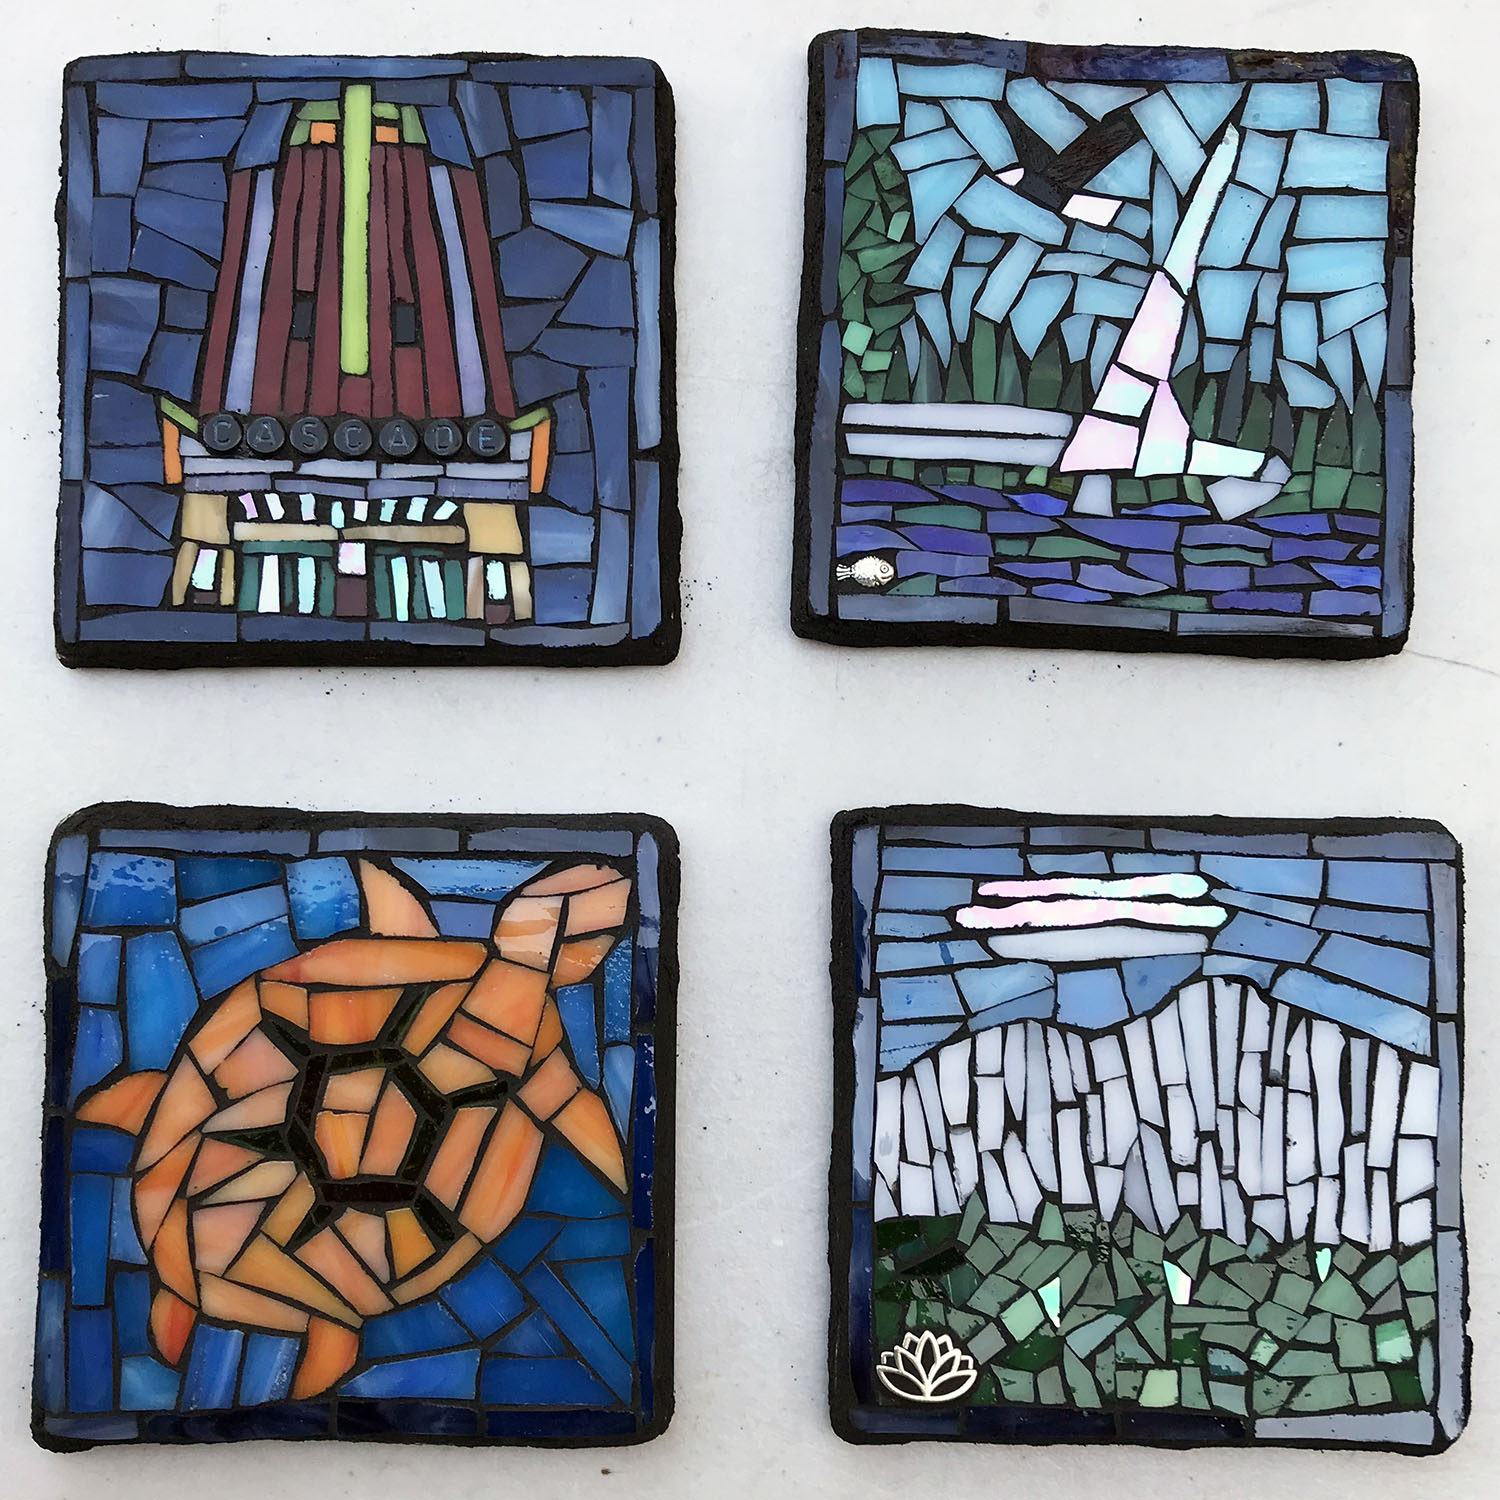 Using Floor Tiles as Backers for Outdoor Mosaic Plaques